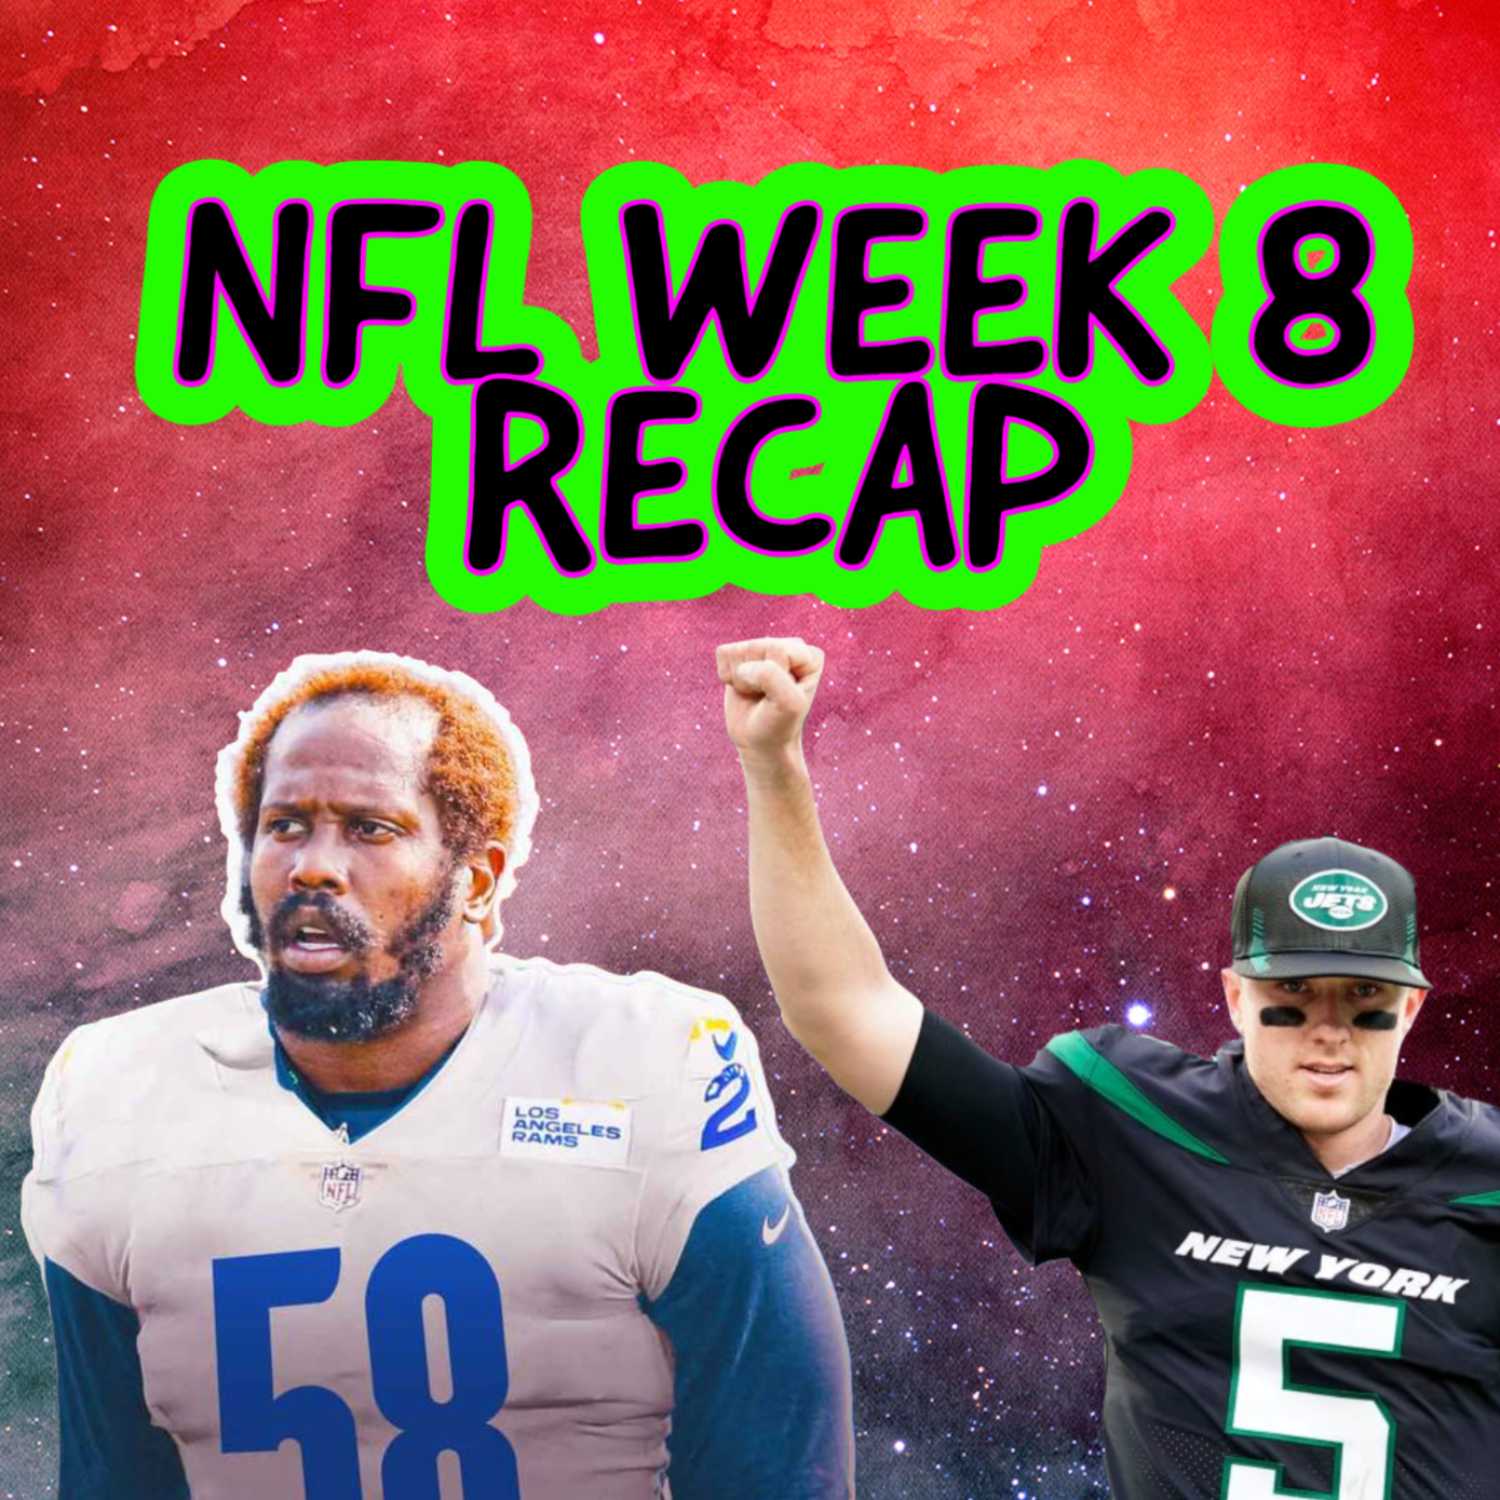 Is Mike White the "Great White Hope"? | Does Von Miller Complete the Rams? | WEEK 8 RECAP